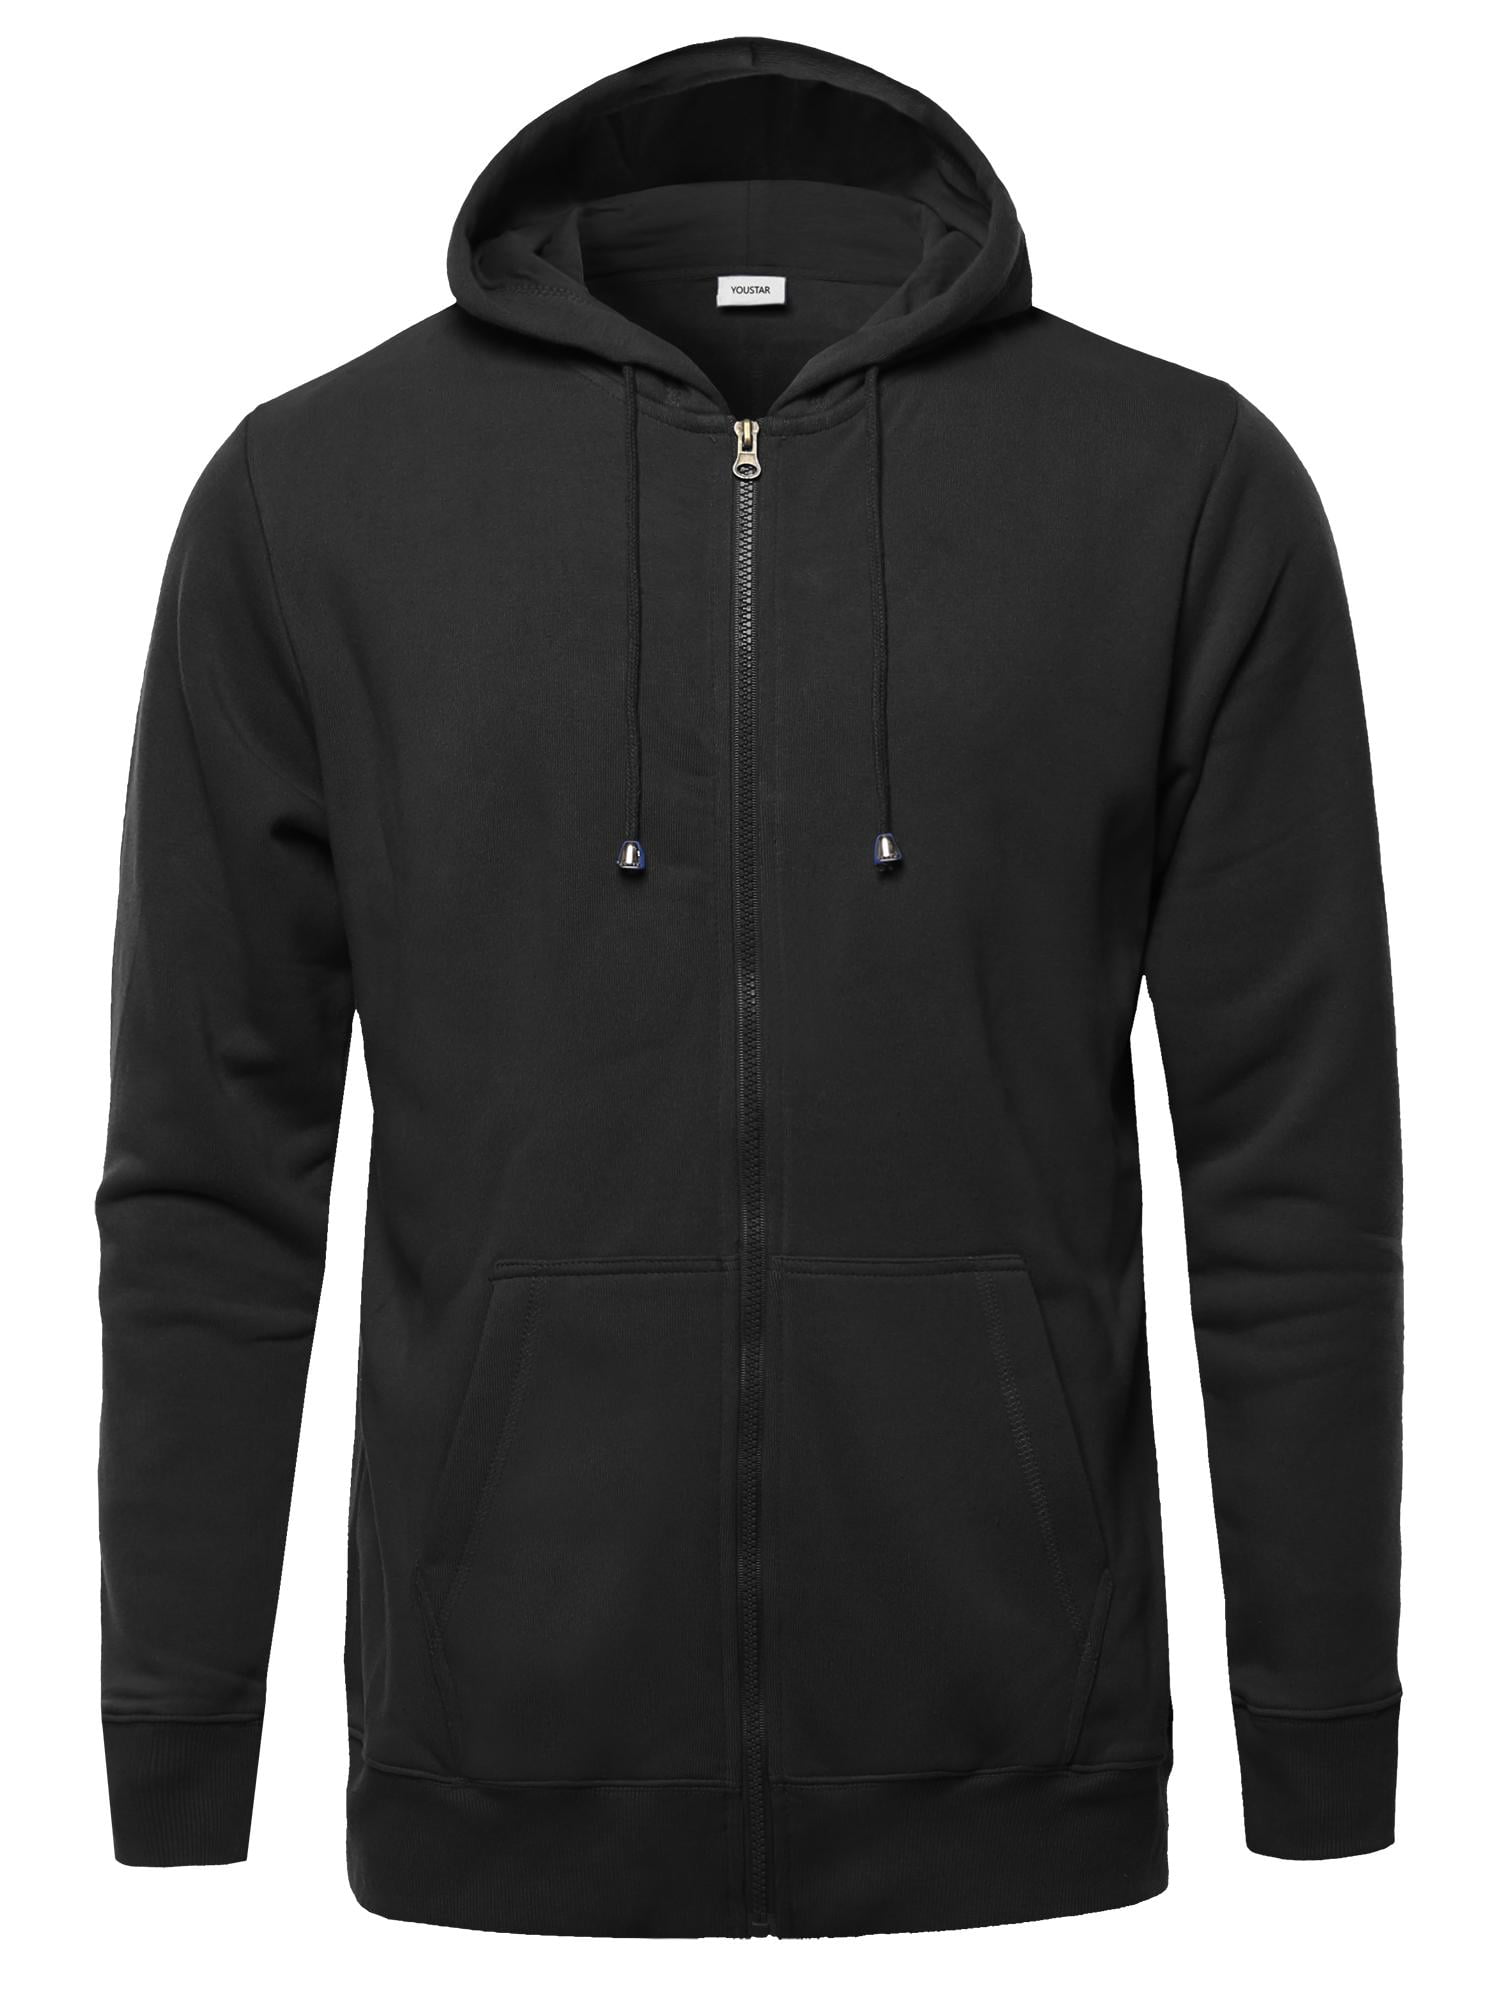 FashionOutfit - FashionOutfit Men's Solid Dry Fit Zip Up Hoodie ...